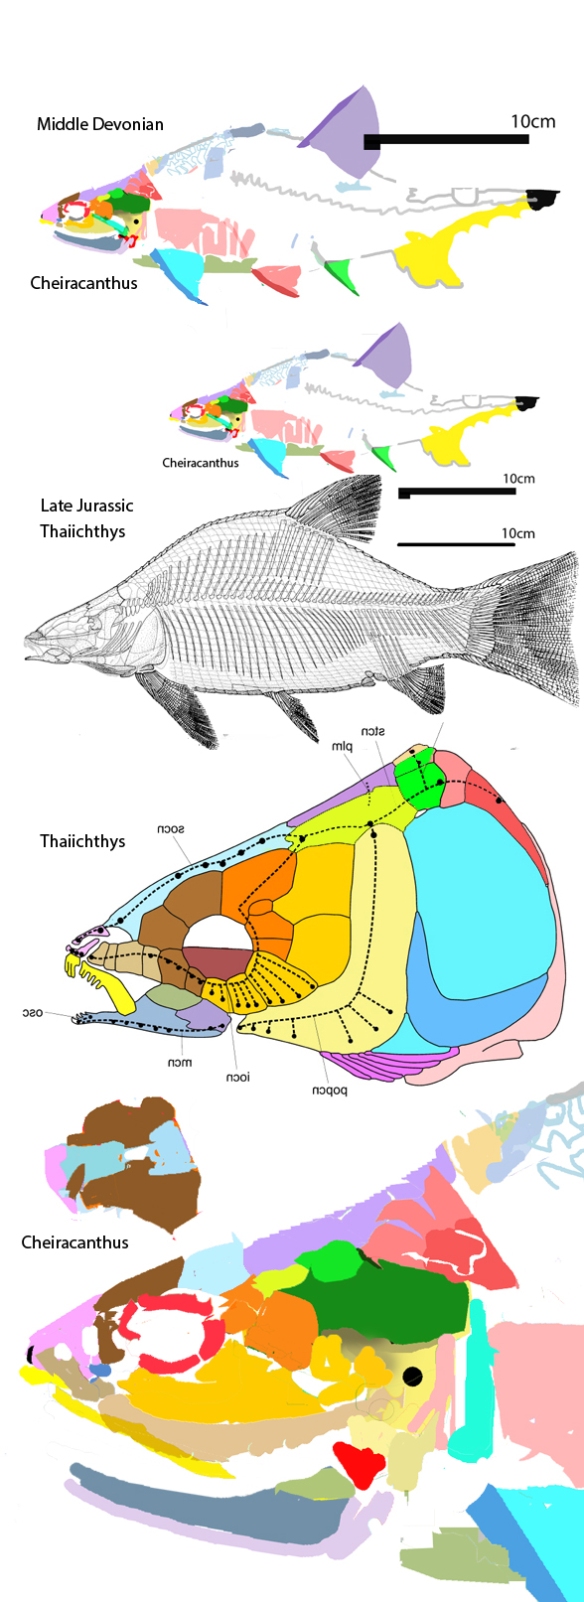 Figure 1. Middle Devonian Cheiracanthus compared to Late Jurassic Thaiichthys. These two humpbacked fish share several other traits despite their chronological separation. 